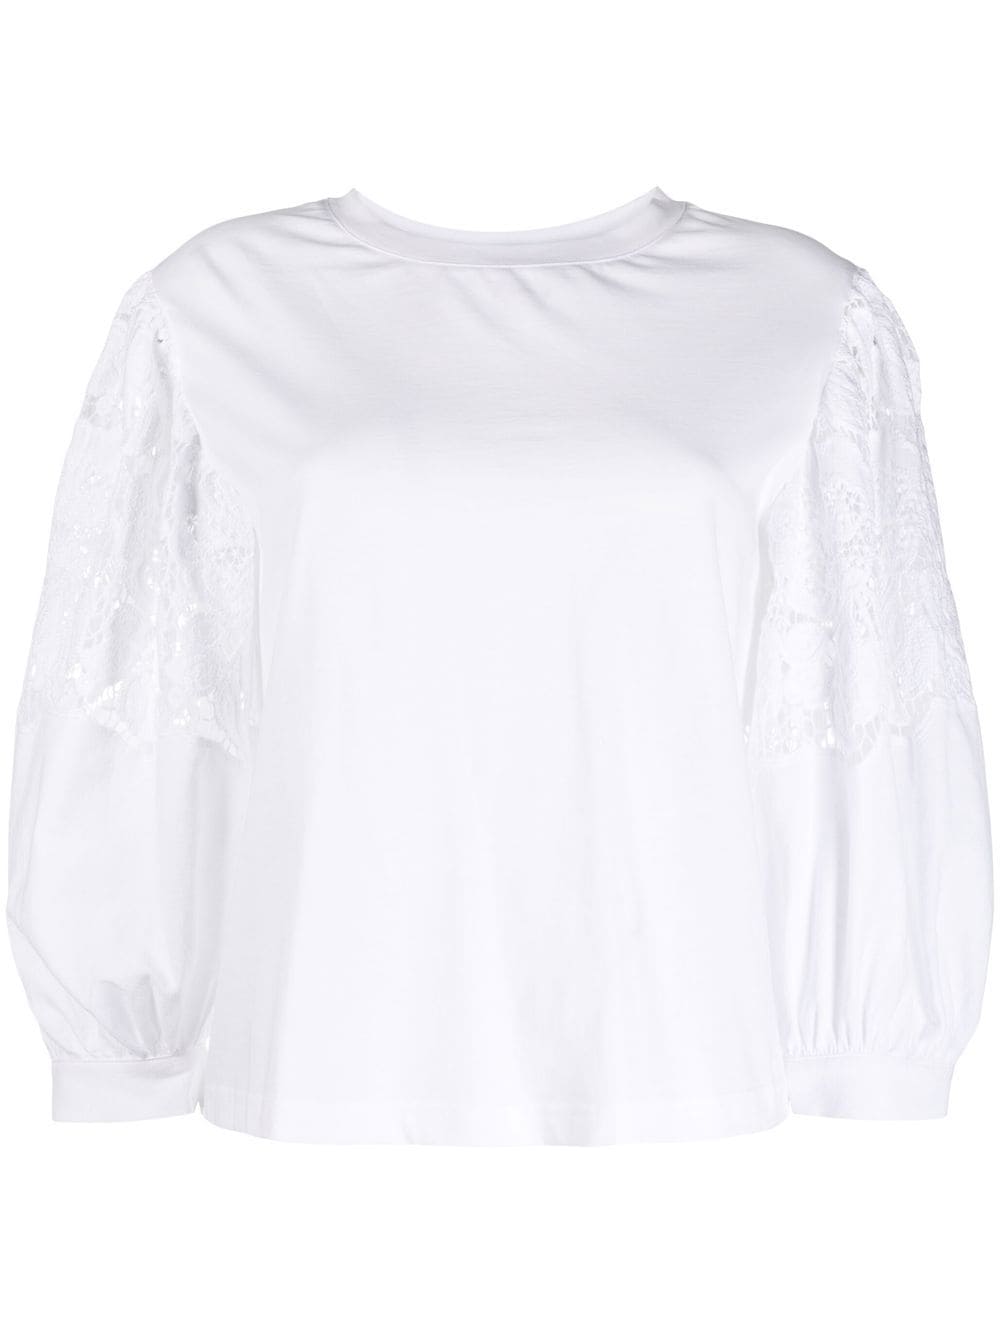 See by Chloé floral embroidery jersey - White von See by Chloé